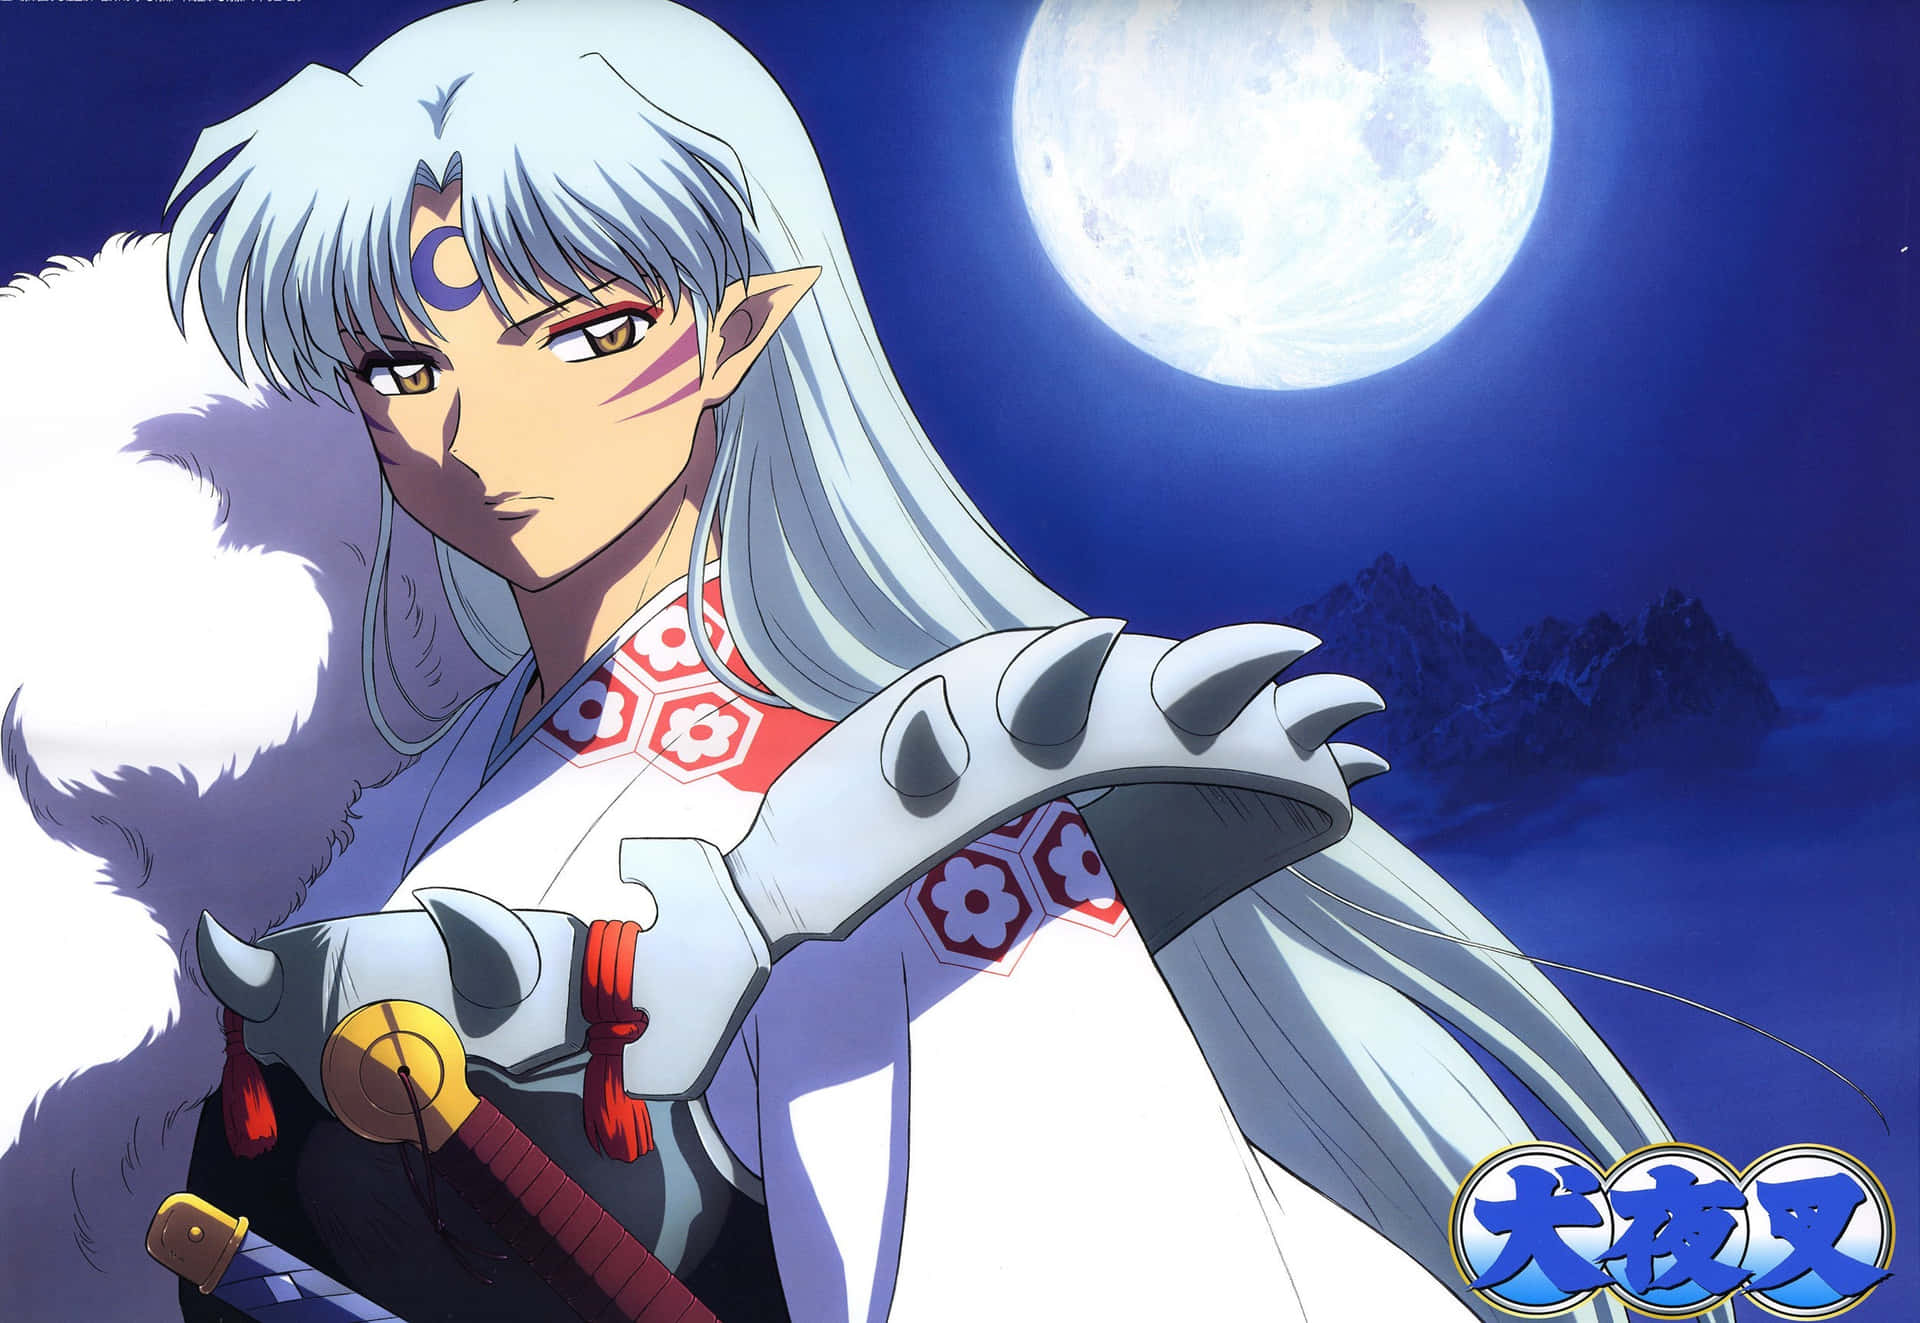 Sesshomaru, the powerful demon lord, stands tall and fierce. Wallpaper